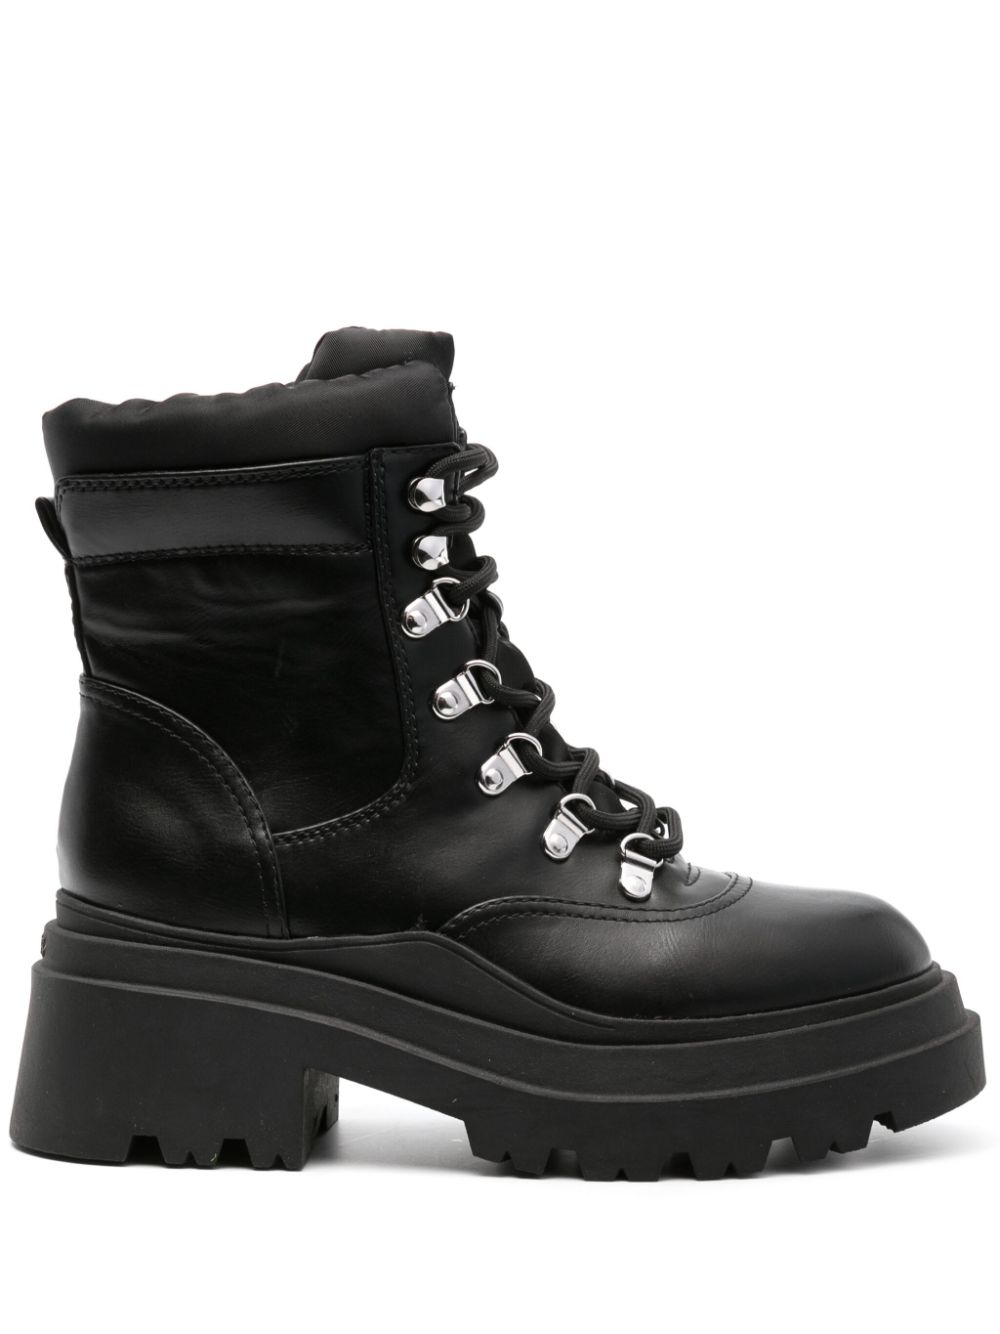 GUESS USA Vaney lace-up combat boots - Black von GUESS USA